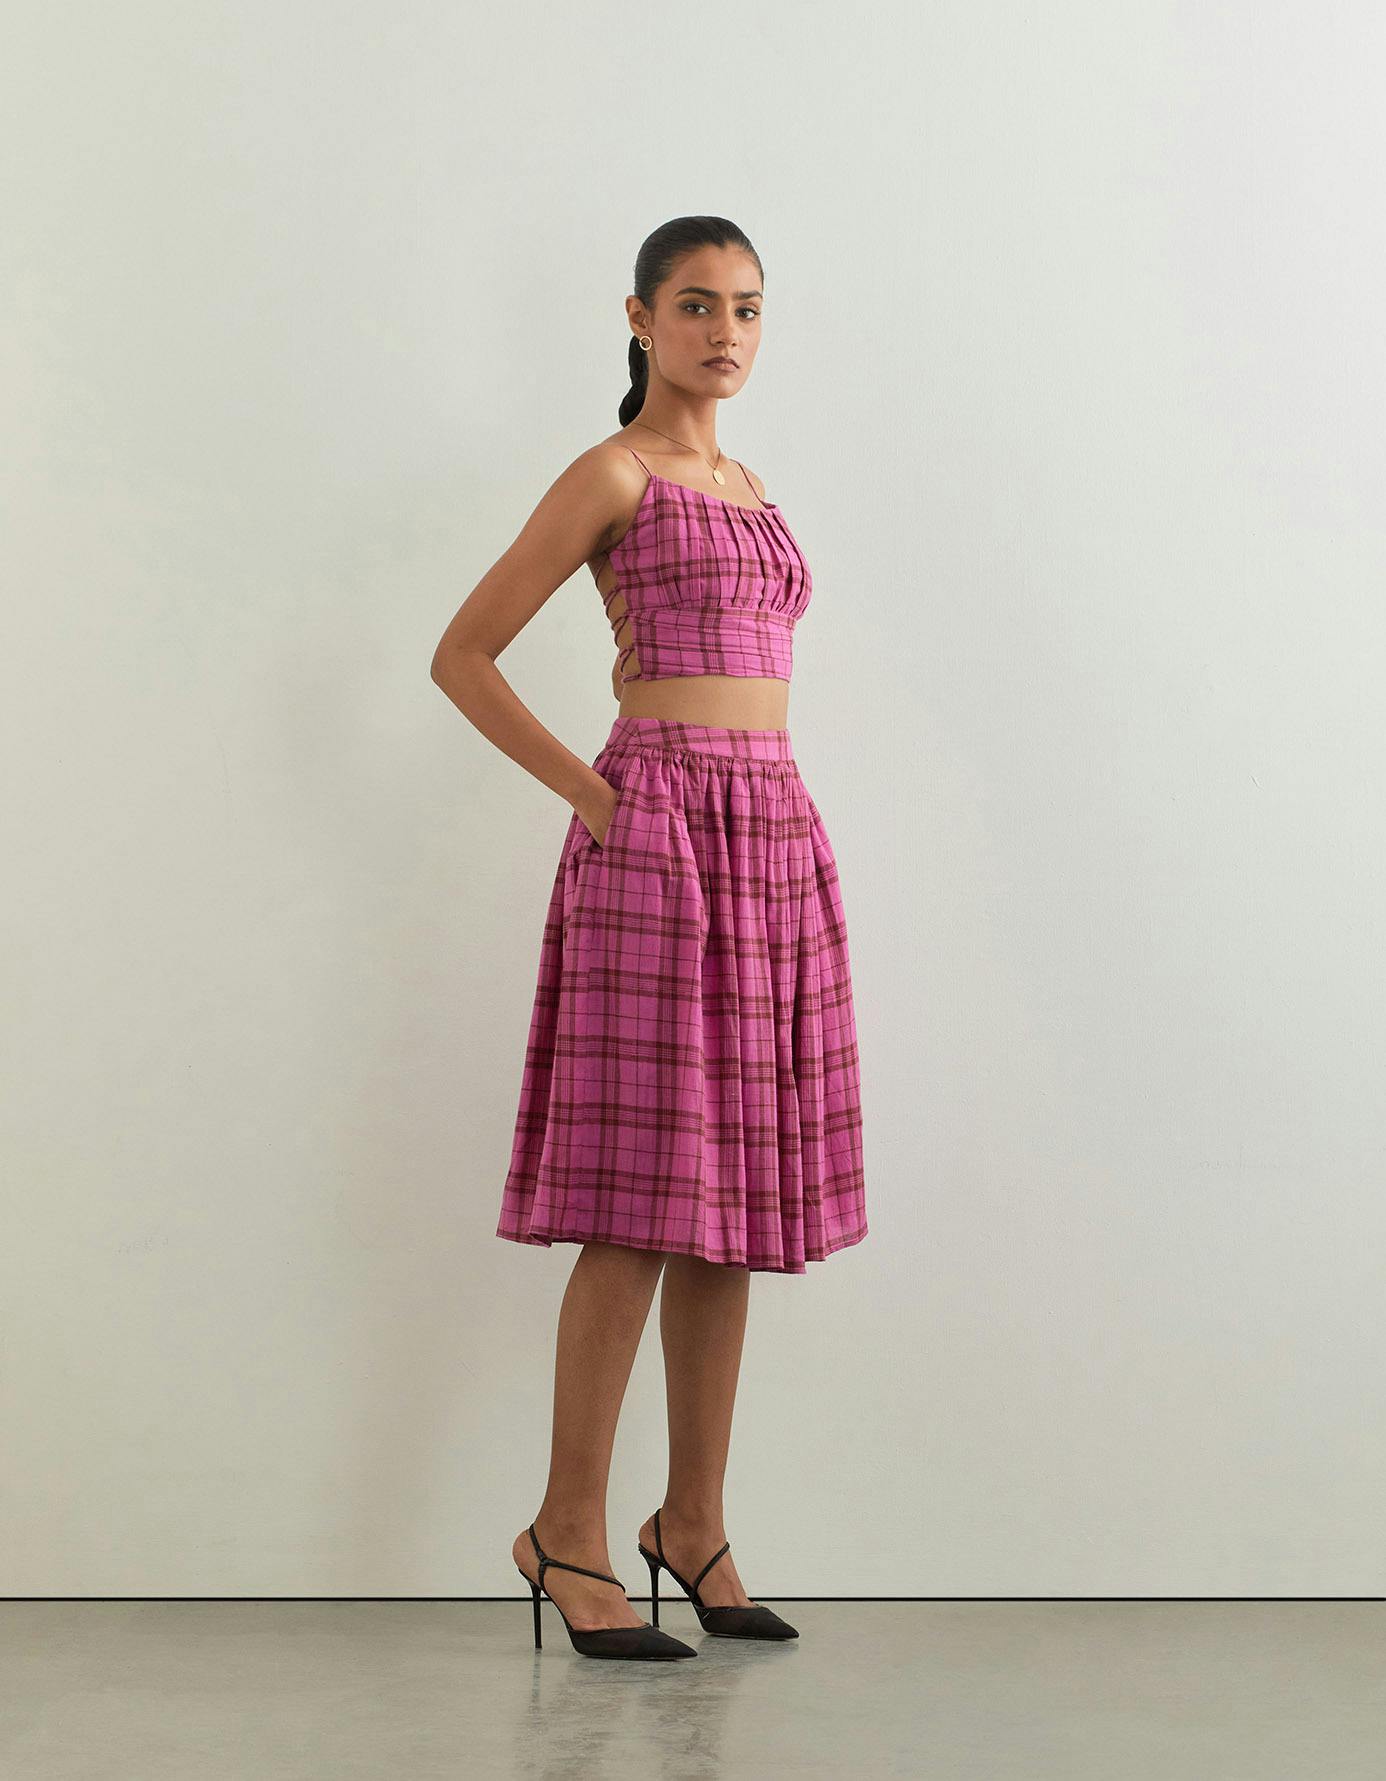 LIA SKIRT In Pink Checks, a product by SIX BUTTONS DOWN